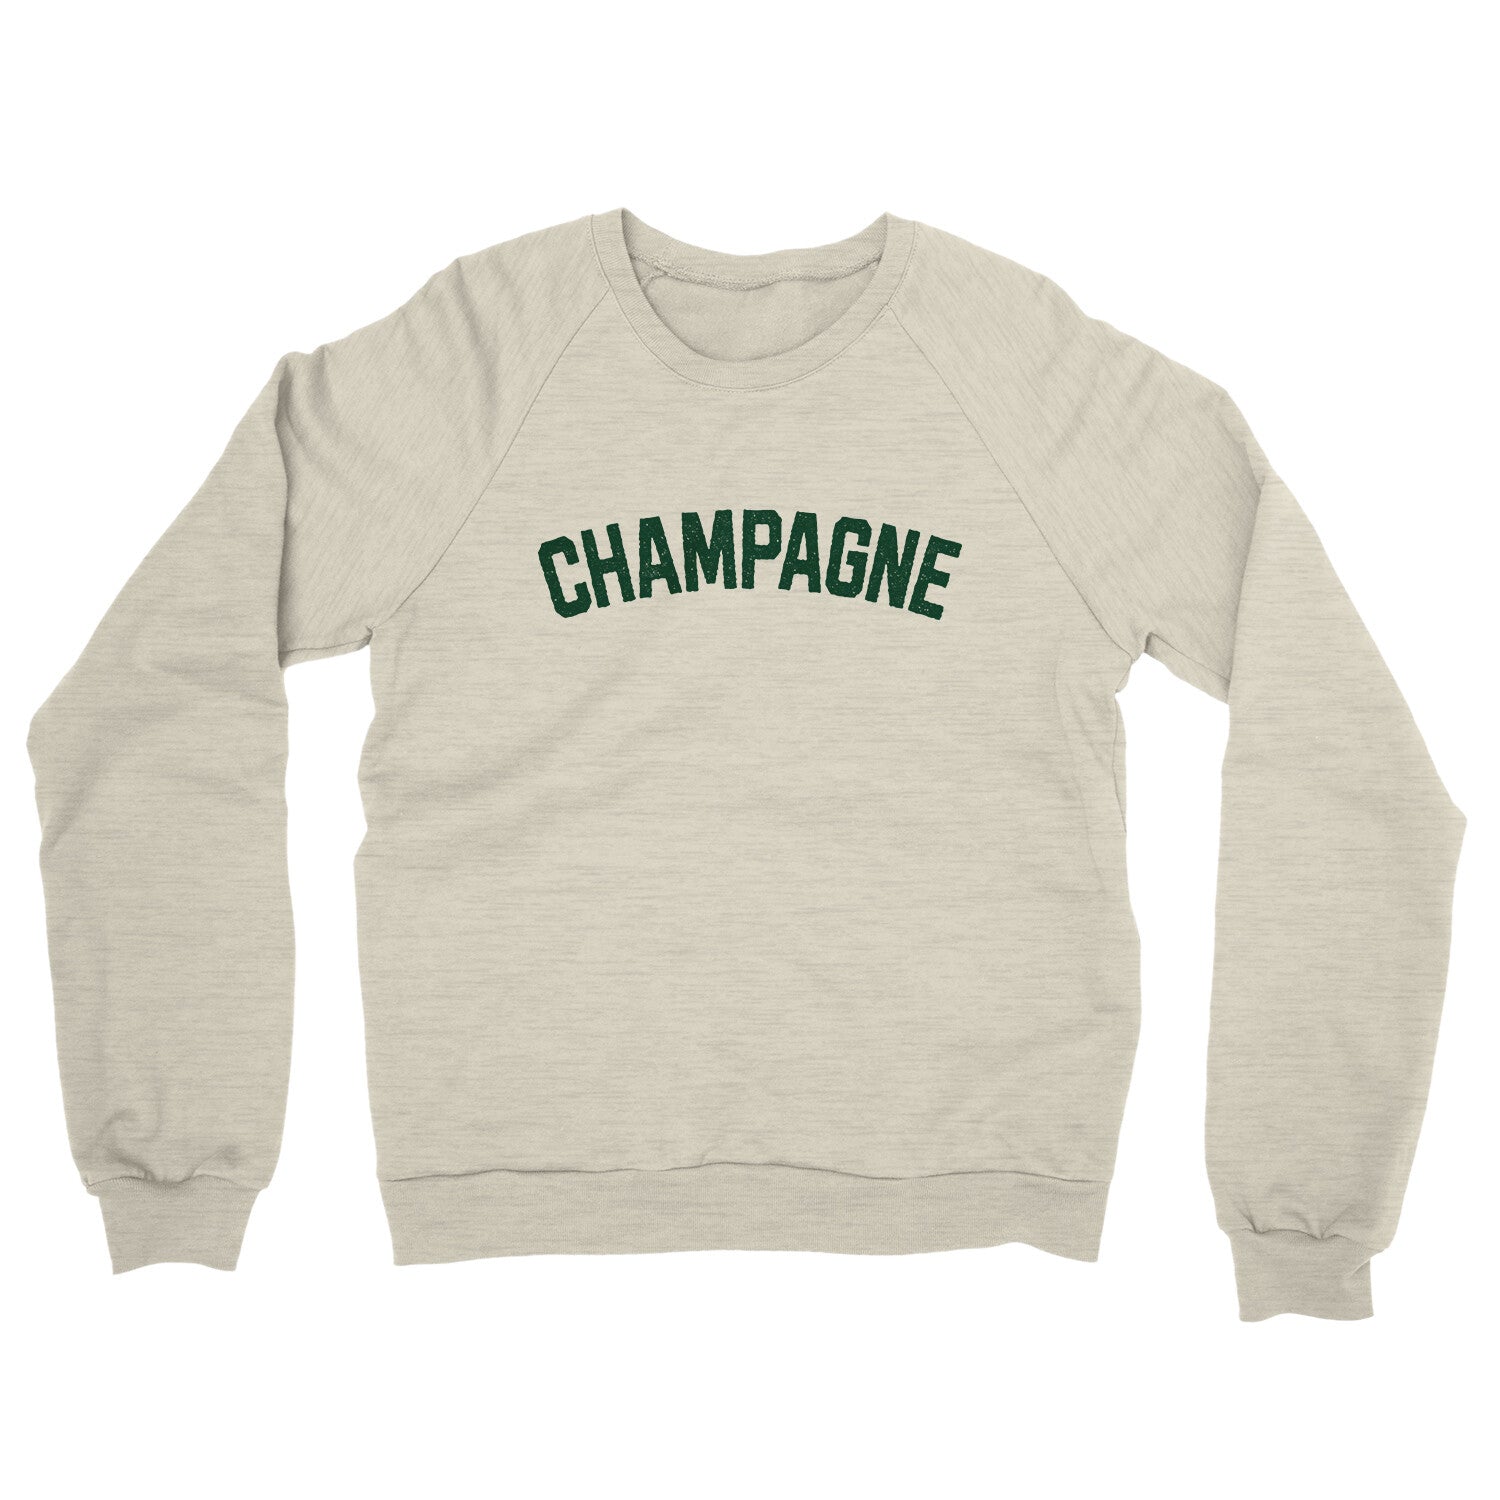 Champagne in Heather Oatmeal Color